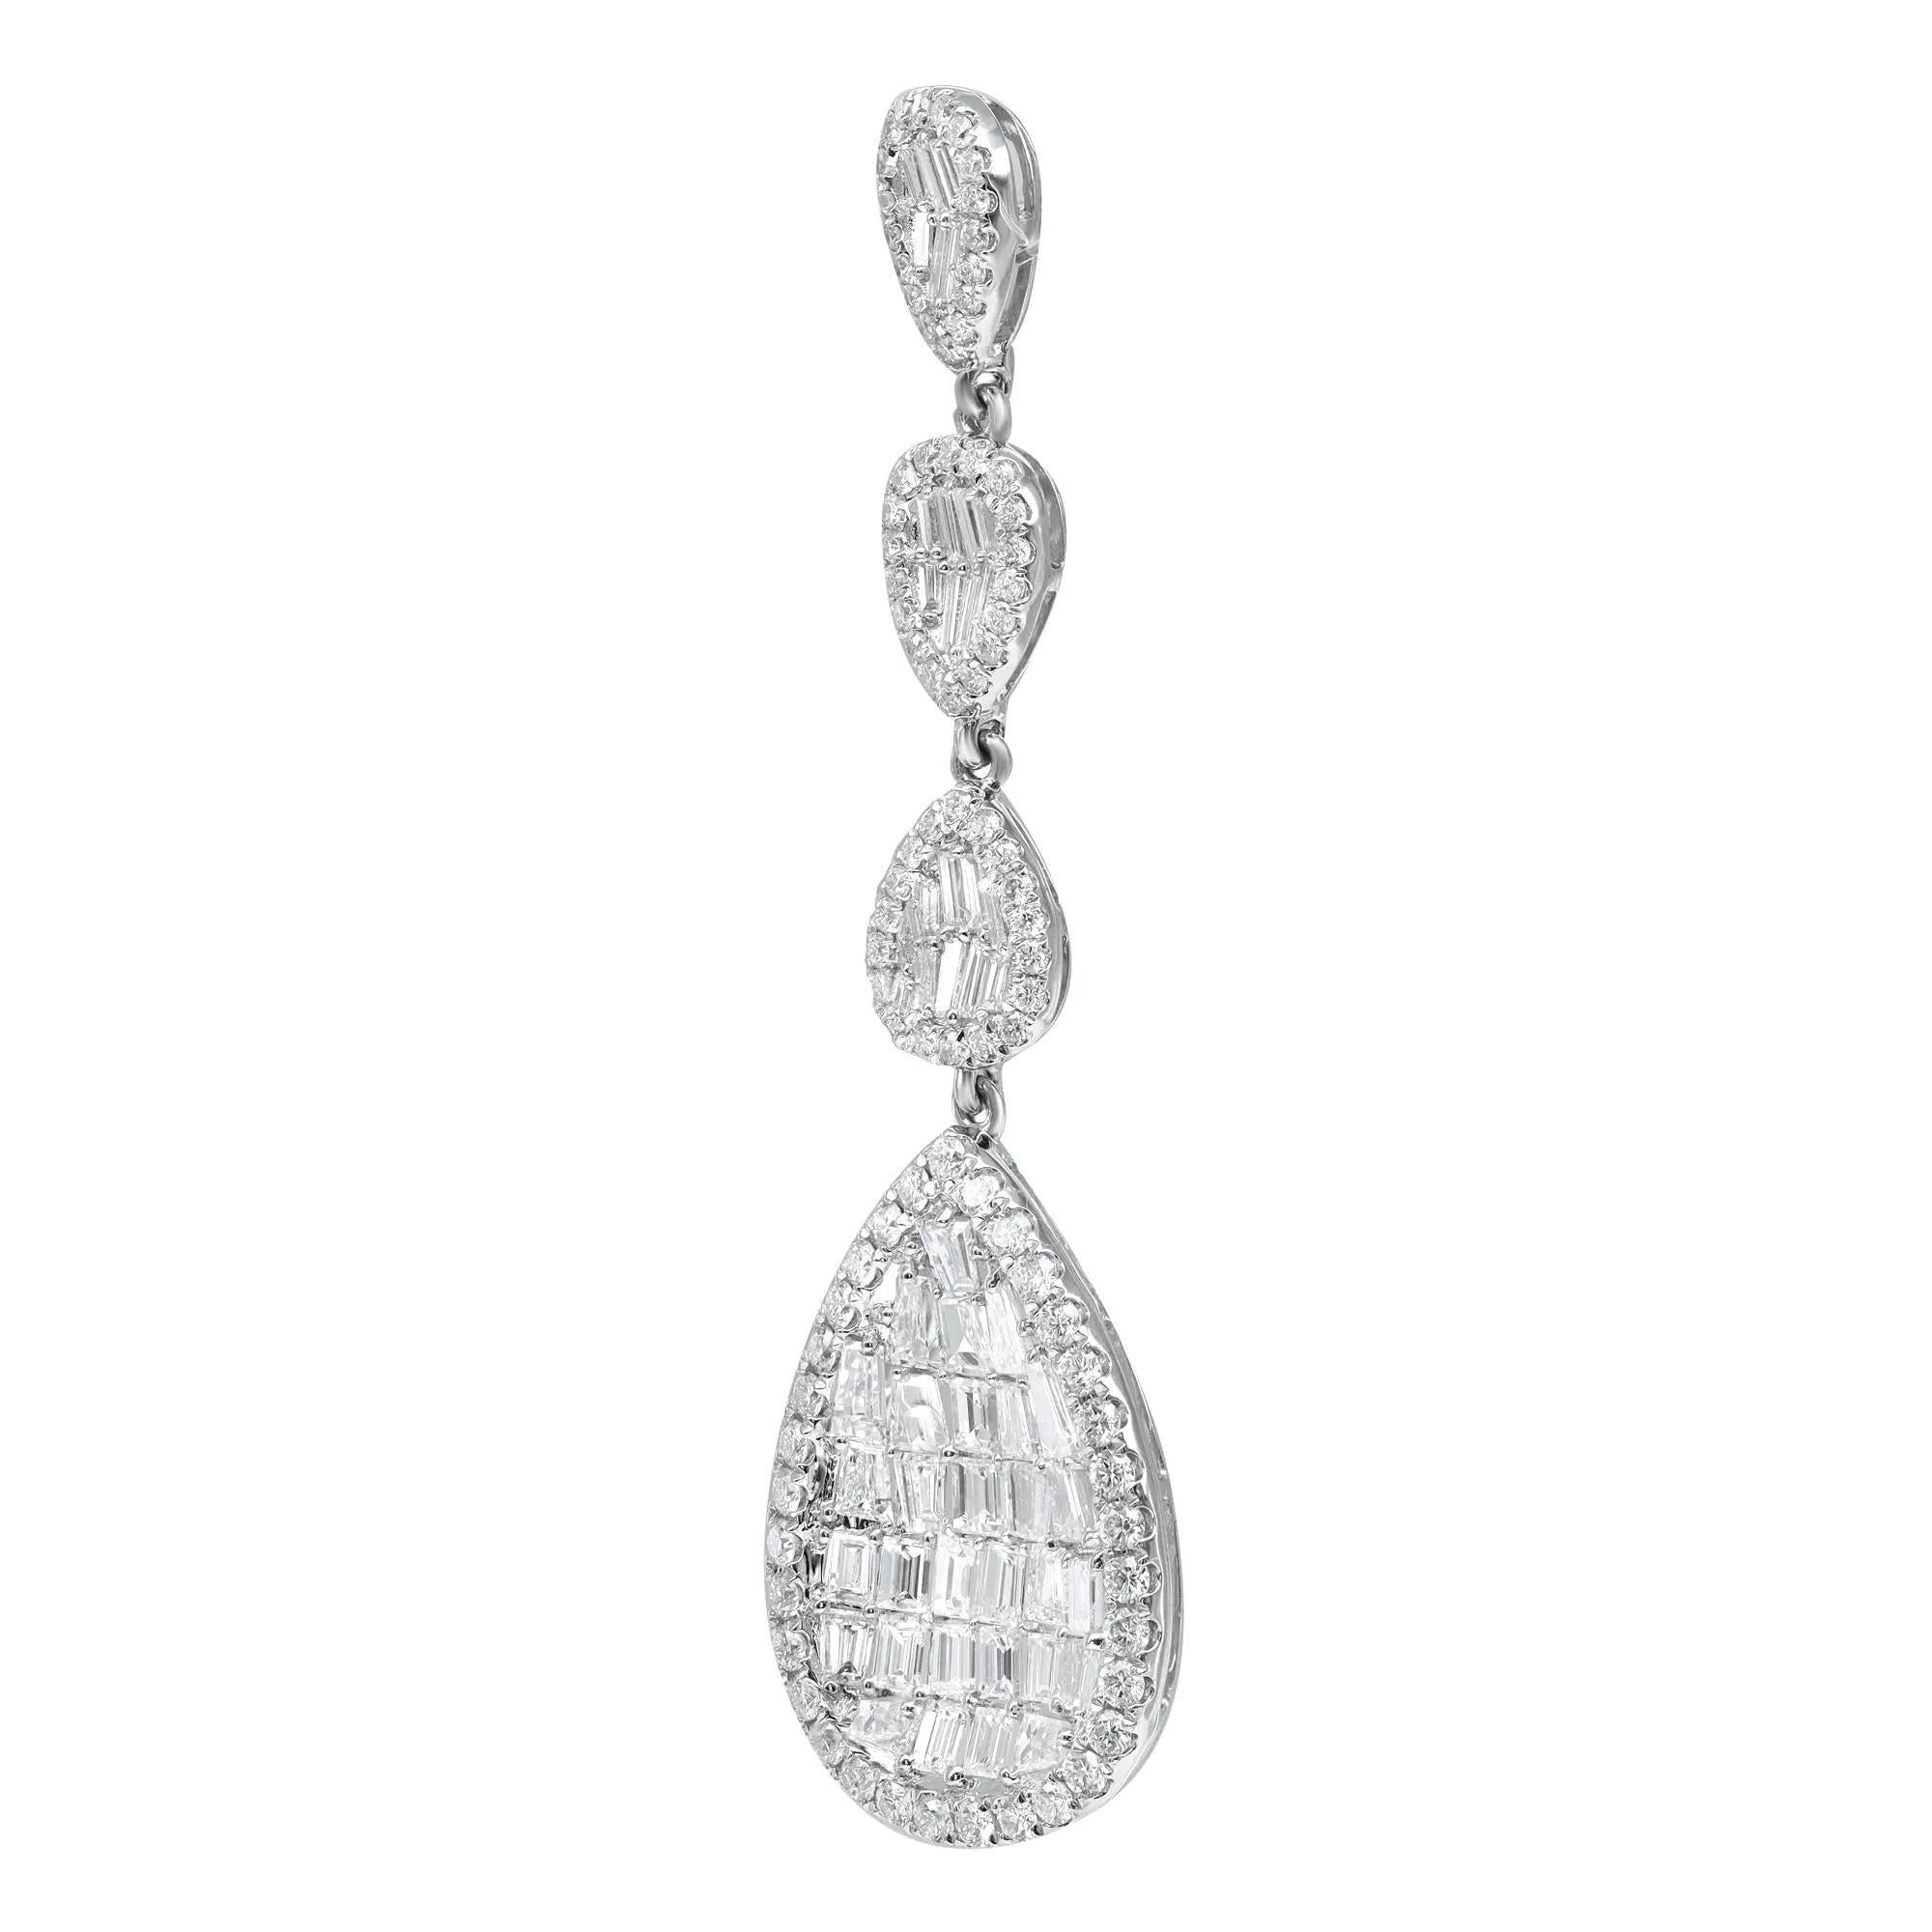 These exemplary drop earrings mounted in 18k white gold add a touch of elegance and sophistication to any outfit. Featuring, channel set baguette and round cut diamonds encrusted in four pear shaped shanks. Total diamond weight: 5.42 carats. Diamond